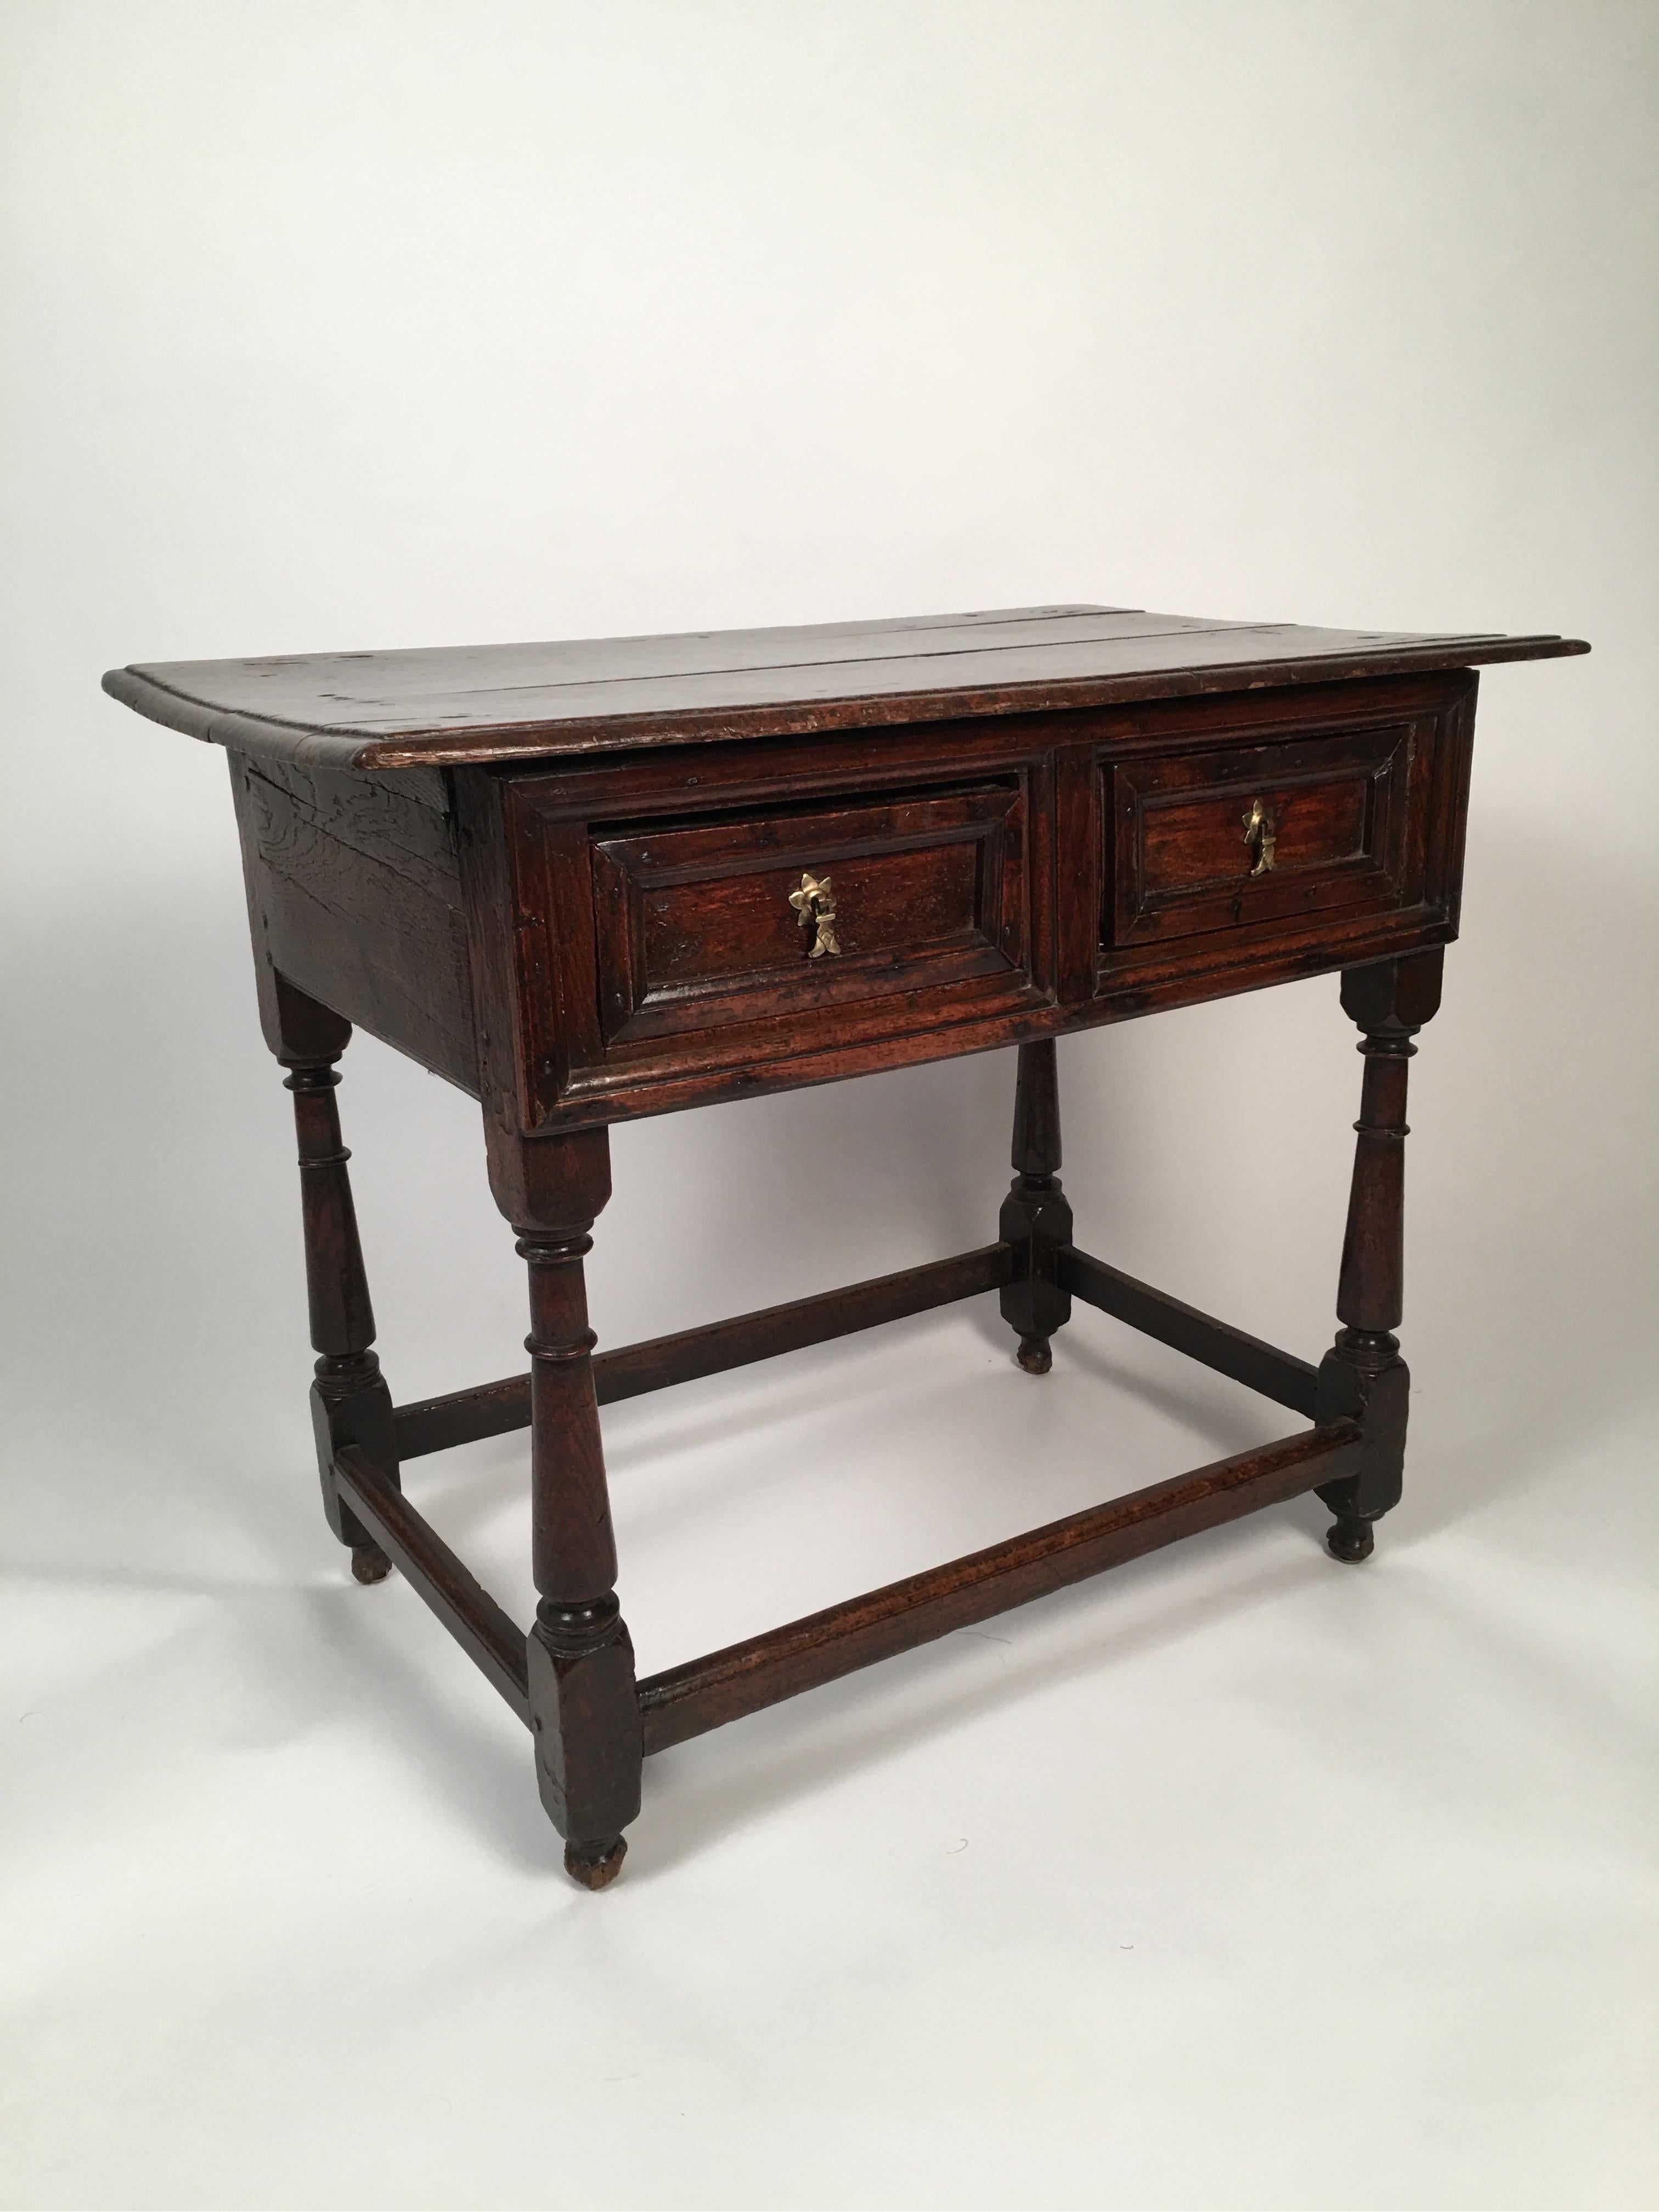 Carved 18th Century English Oak Tavern Table